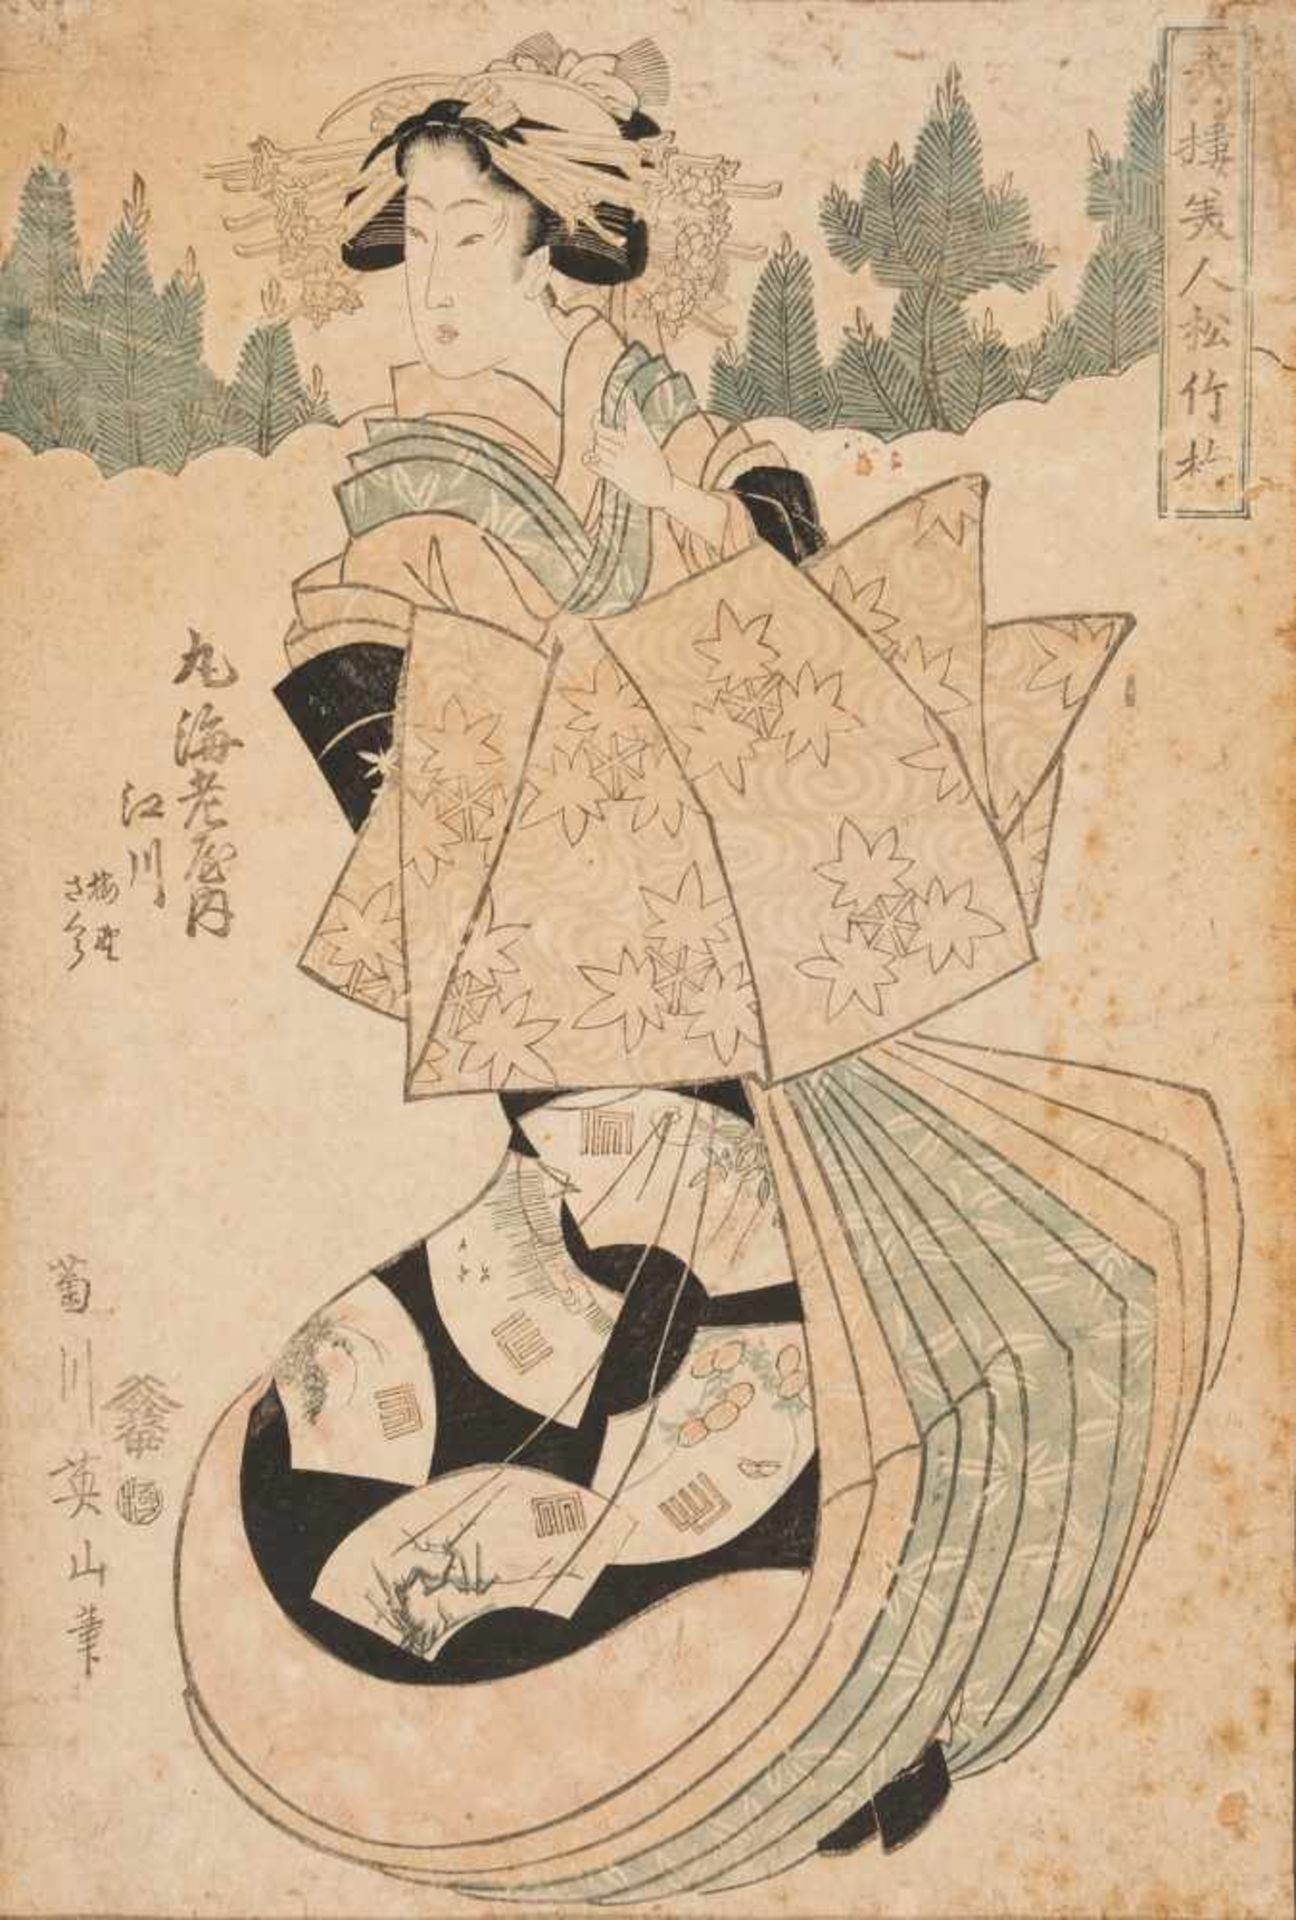 A Japanese Ukiyo-e woodblock print. Edo Period (1603-1868).Signed with calligraphies and a mark